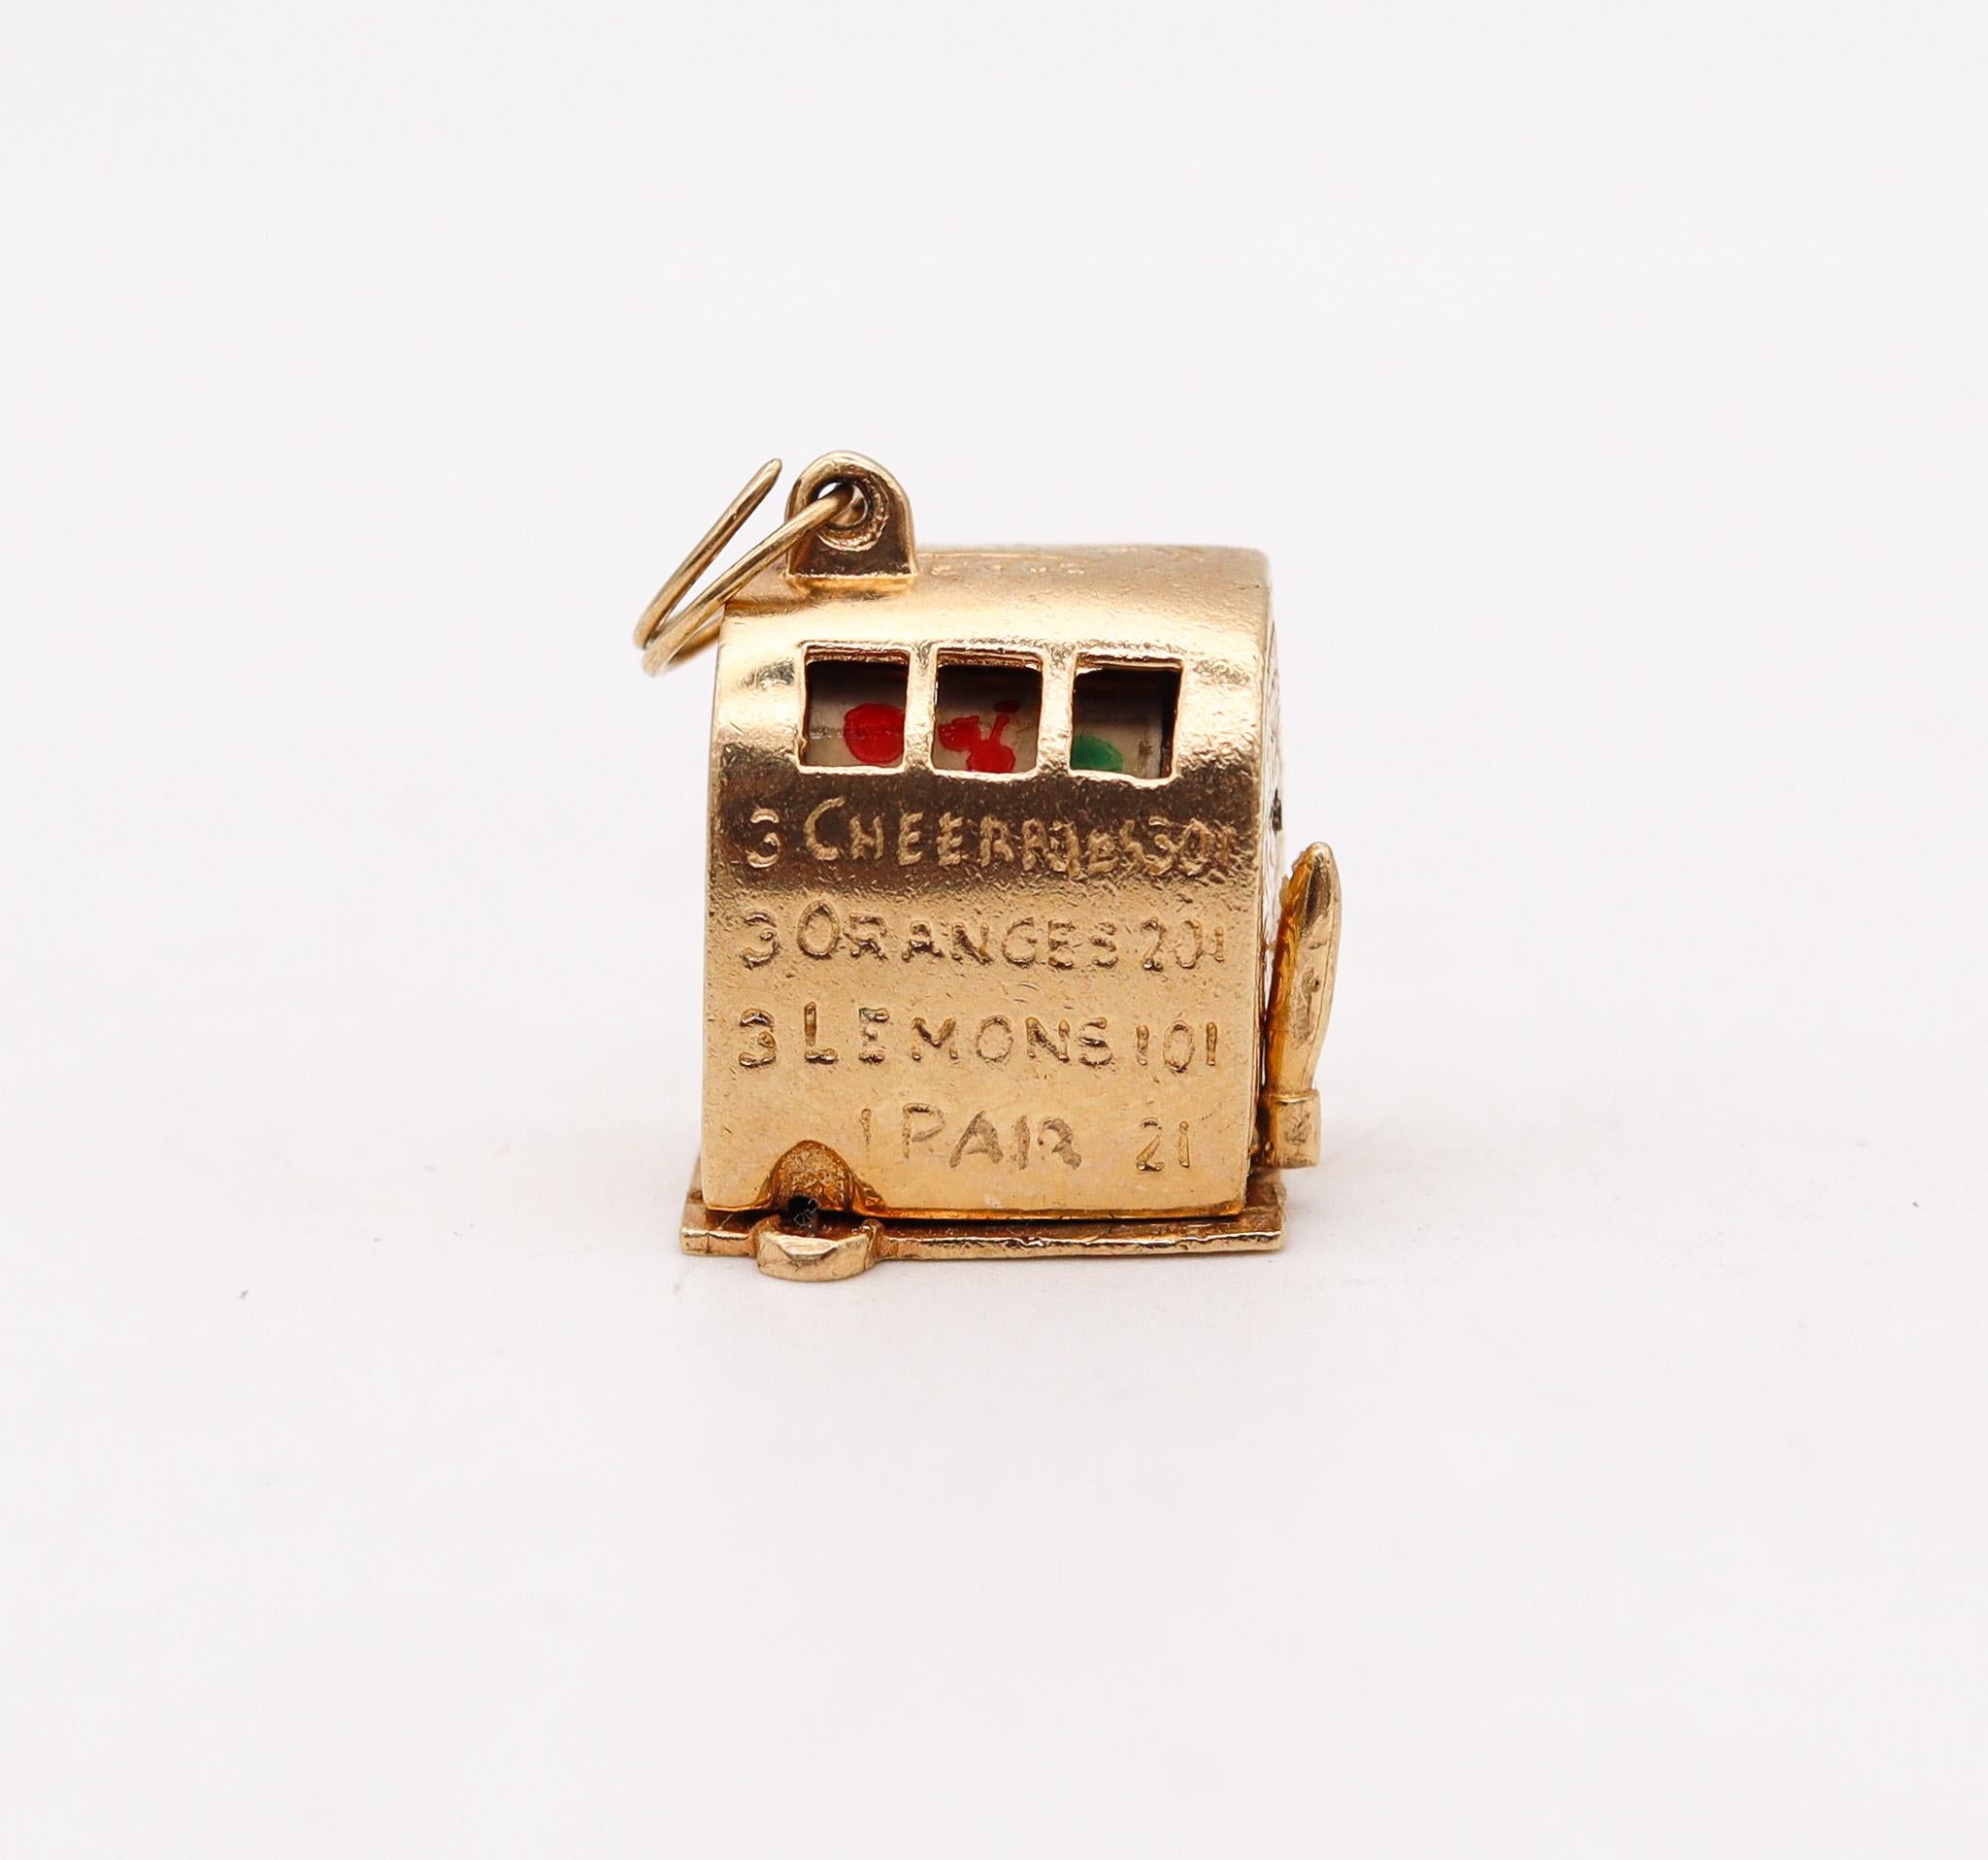 Casino slot machine charm-pendant 

Beautiful and highly detailed three-dimensional piece, created in Italy during the post-war and the mid-century period, back in the 1960. This stunning playful toy charm has been crafted with mechanical movements